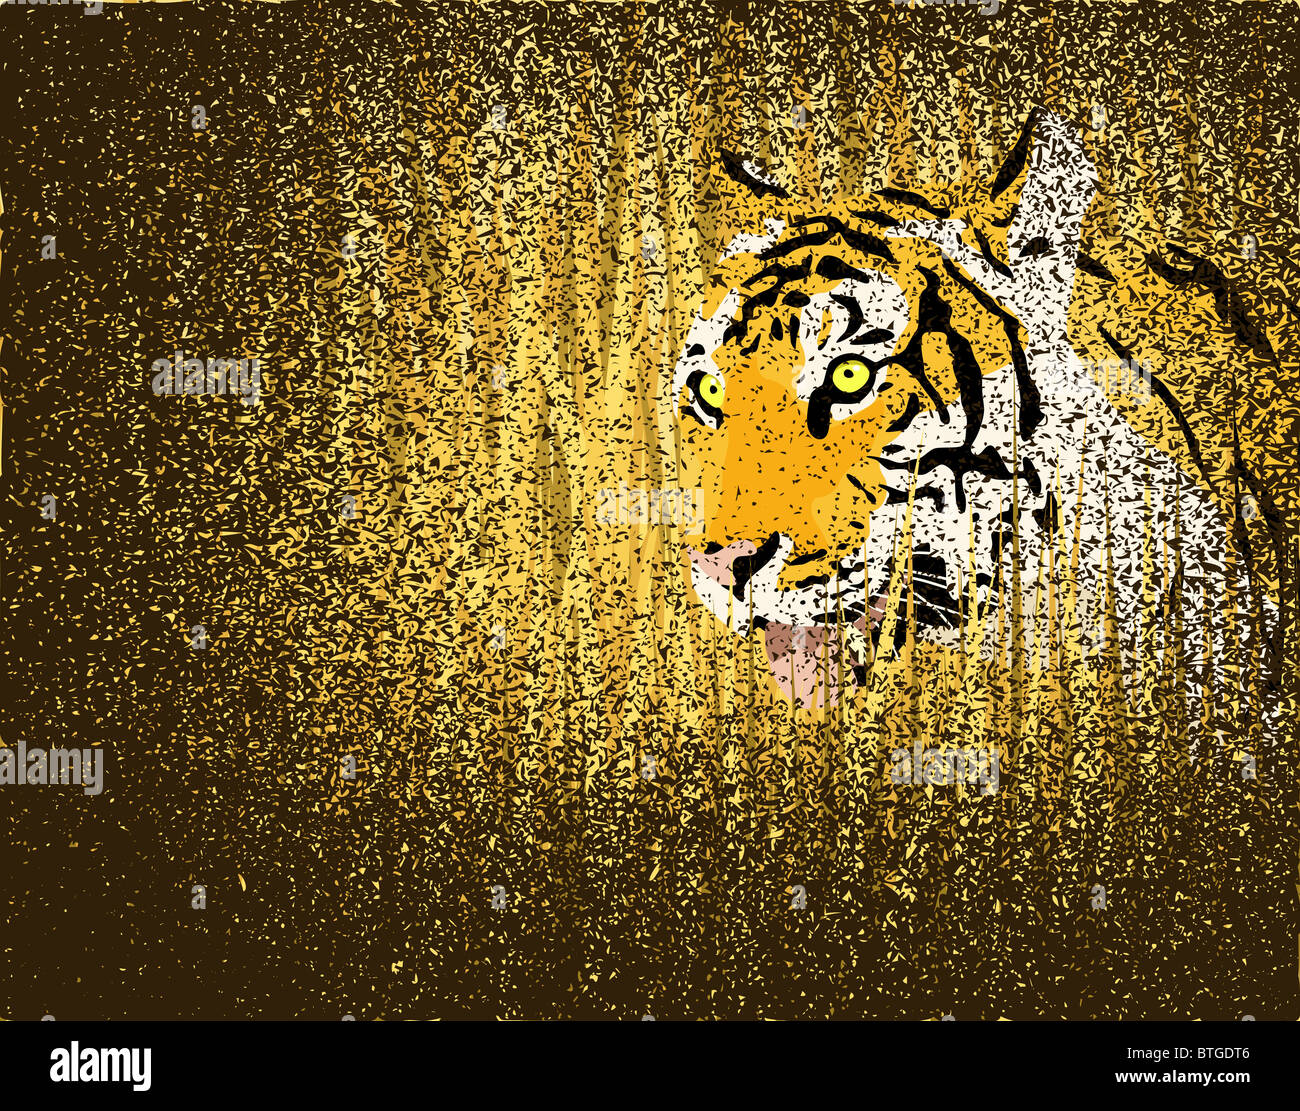 Illustration of a tiger in grass with grunge Stock Photo